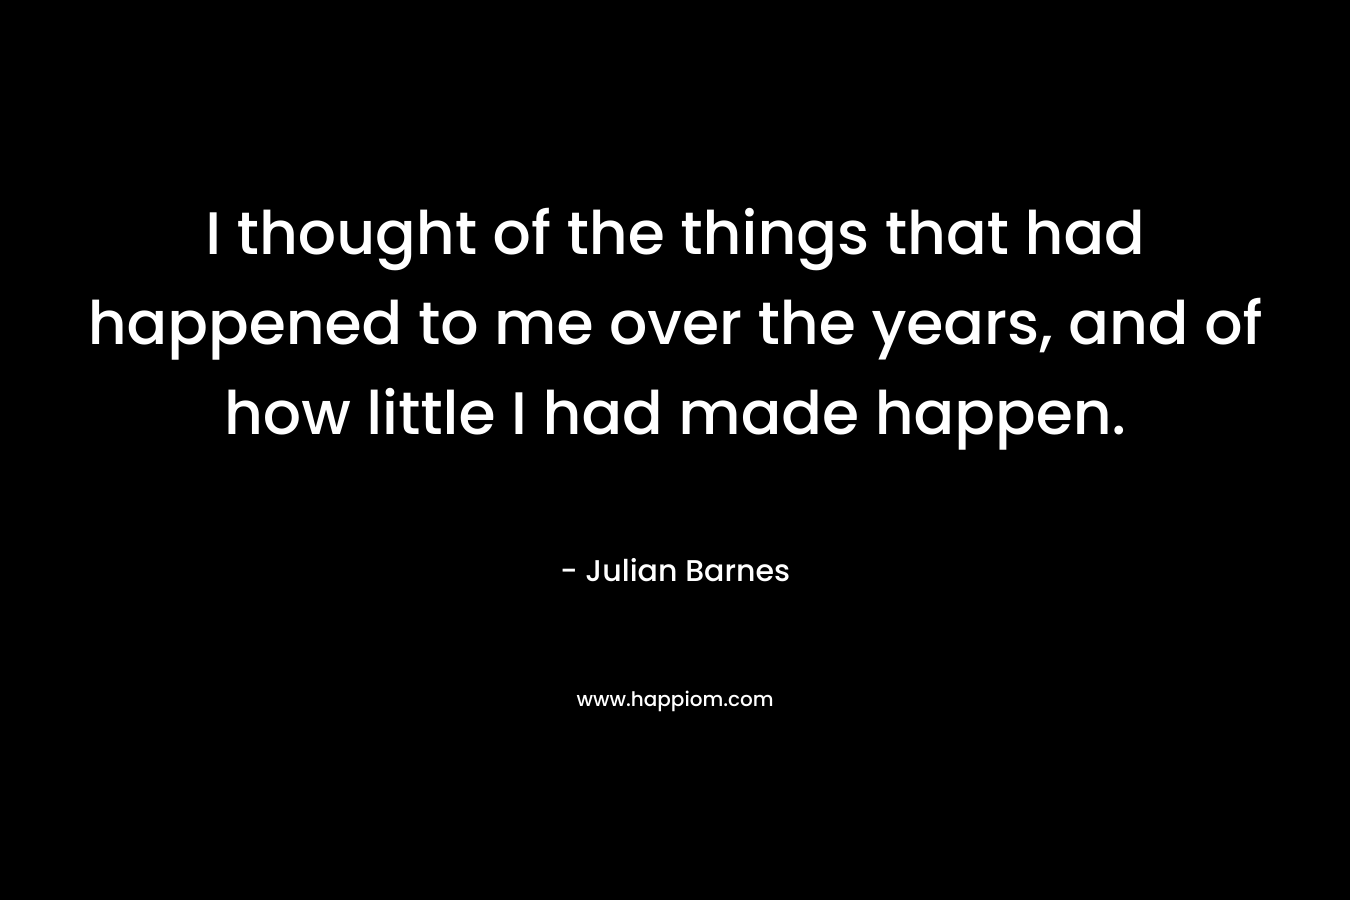 I thought of the things that had happened to me over the years, and of how little I had made happen. – Julian Barnes